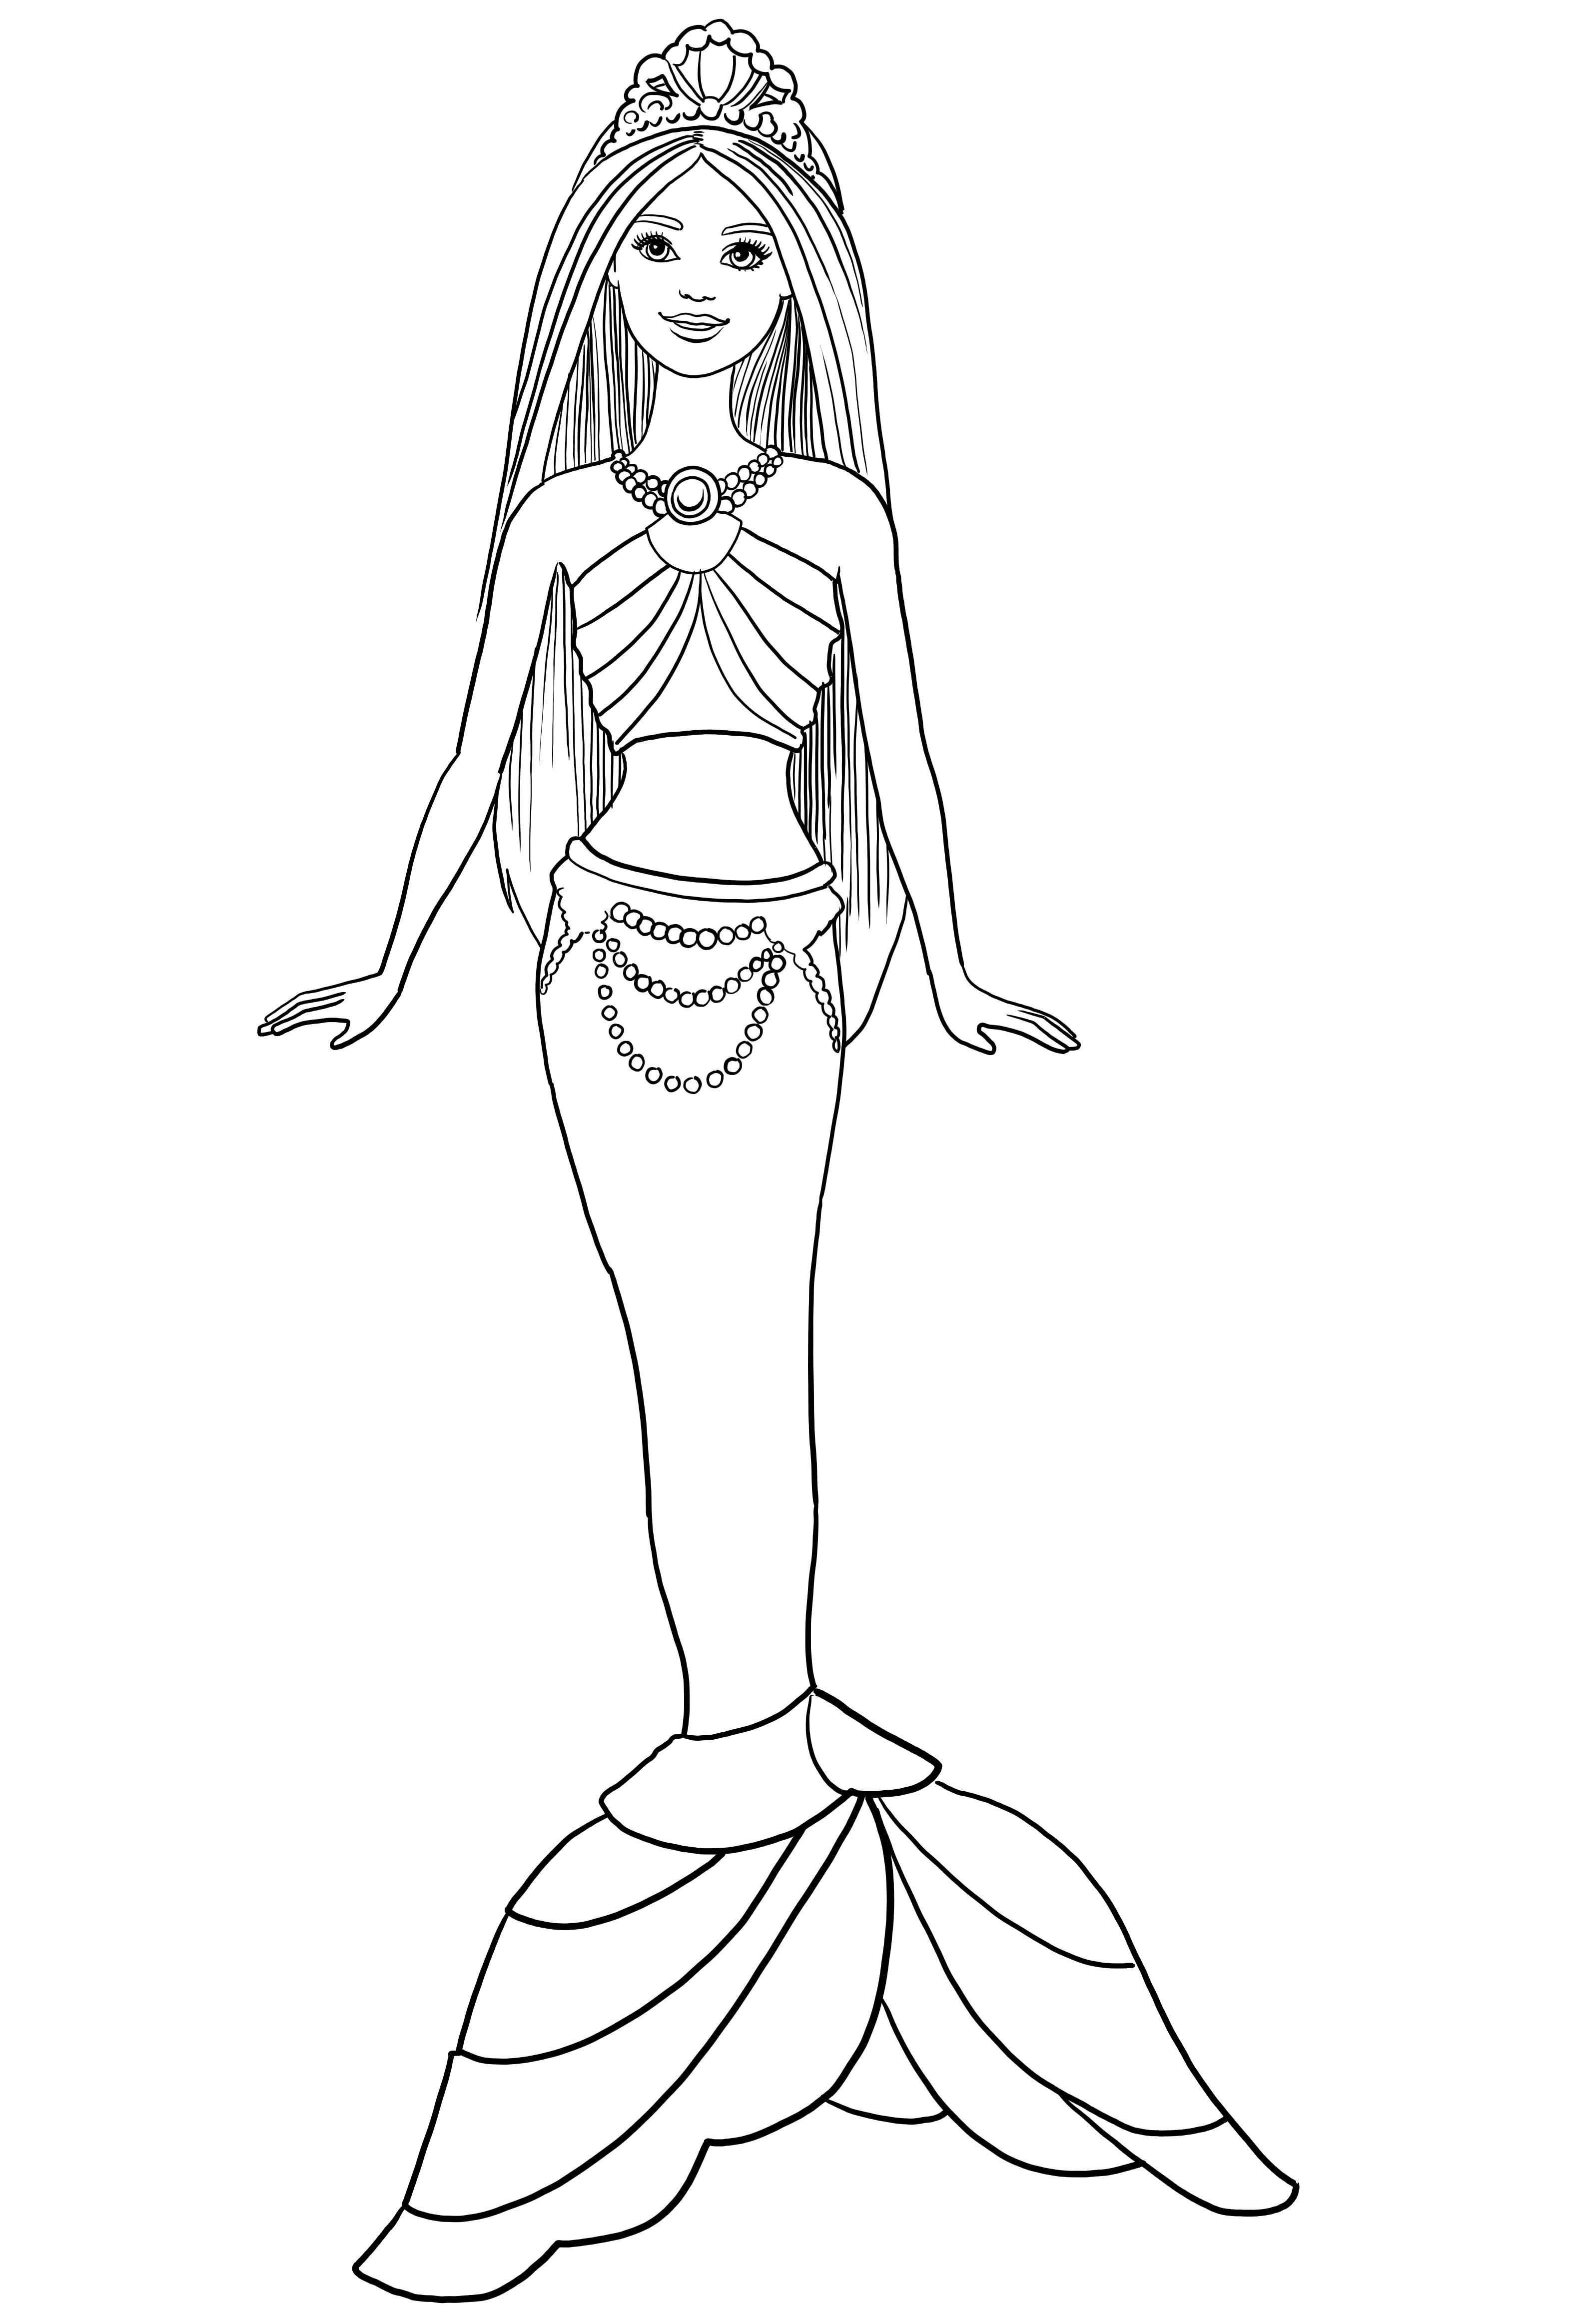 Barbie Dreamtopia mermaid rainbow from Barbie coloring page to print and coloring